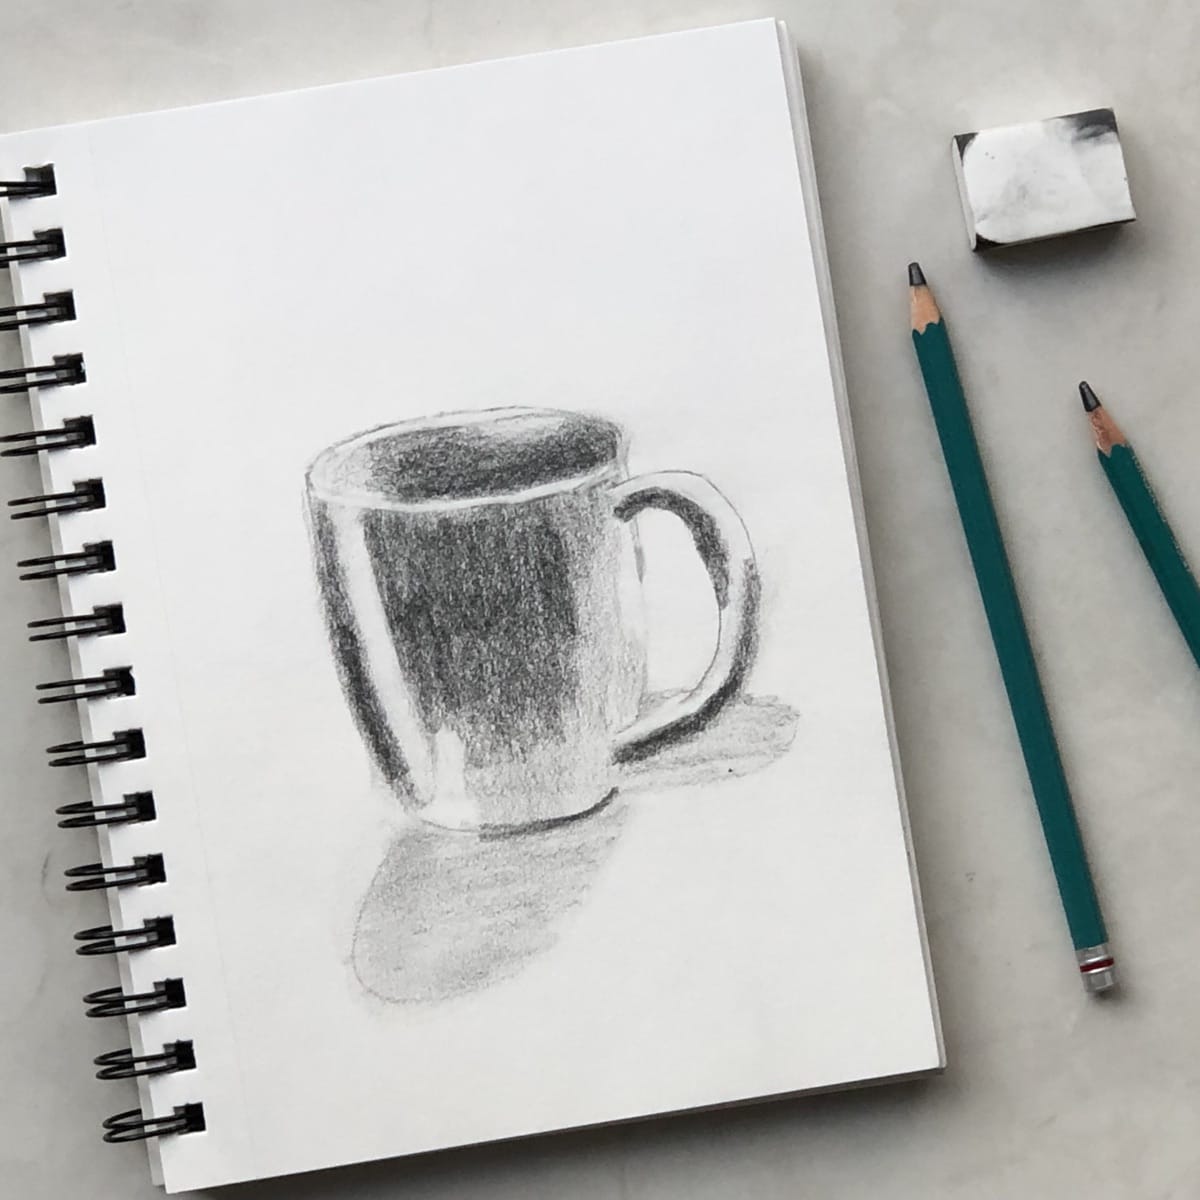 Pencil sketch of a coffee mug on a spiral-bound sketchbook with drawing pencils and an eraser.